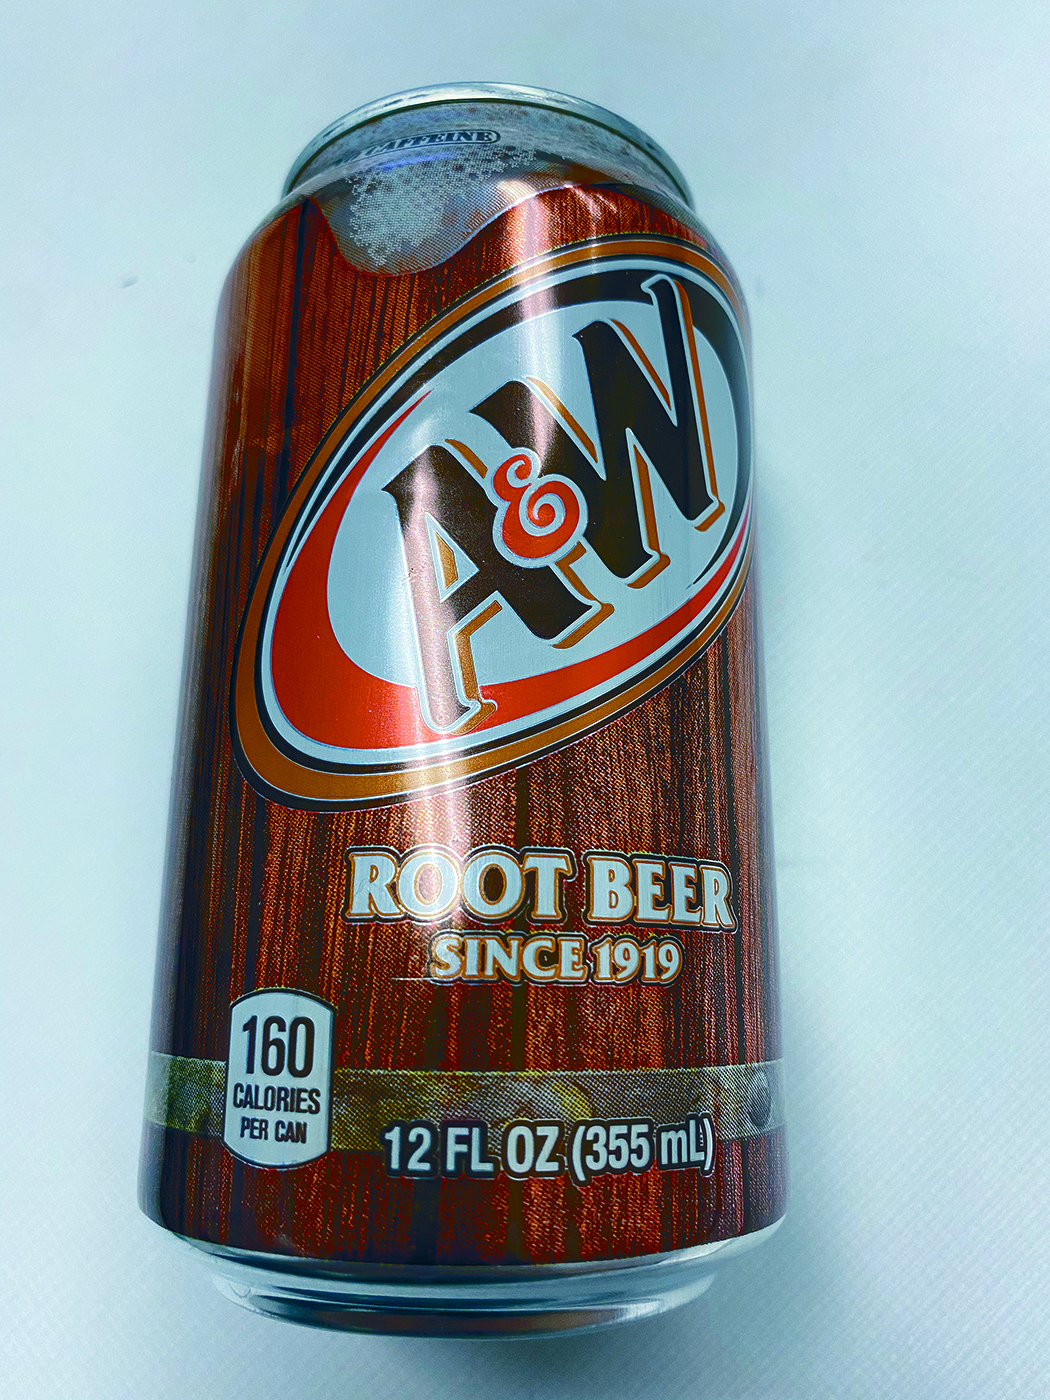 An image of a A&W root beer can.